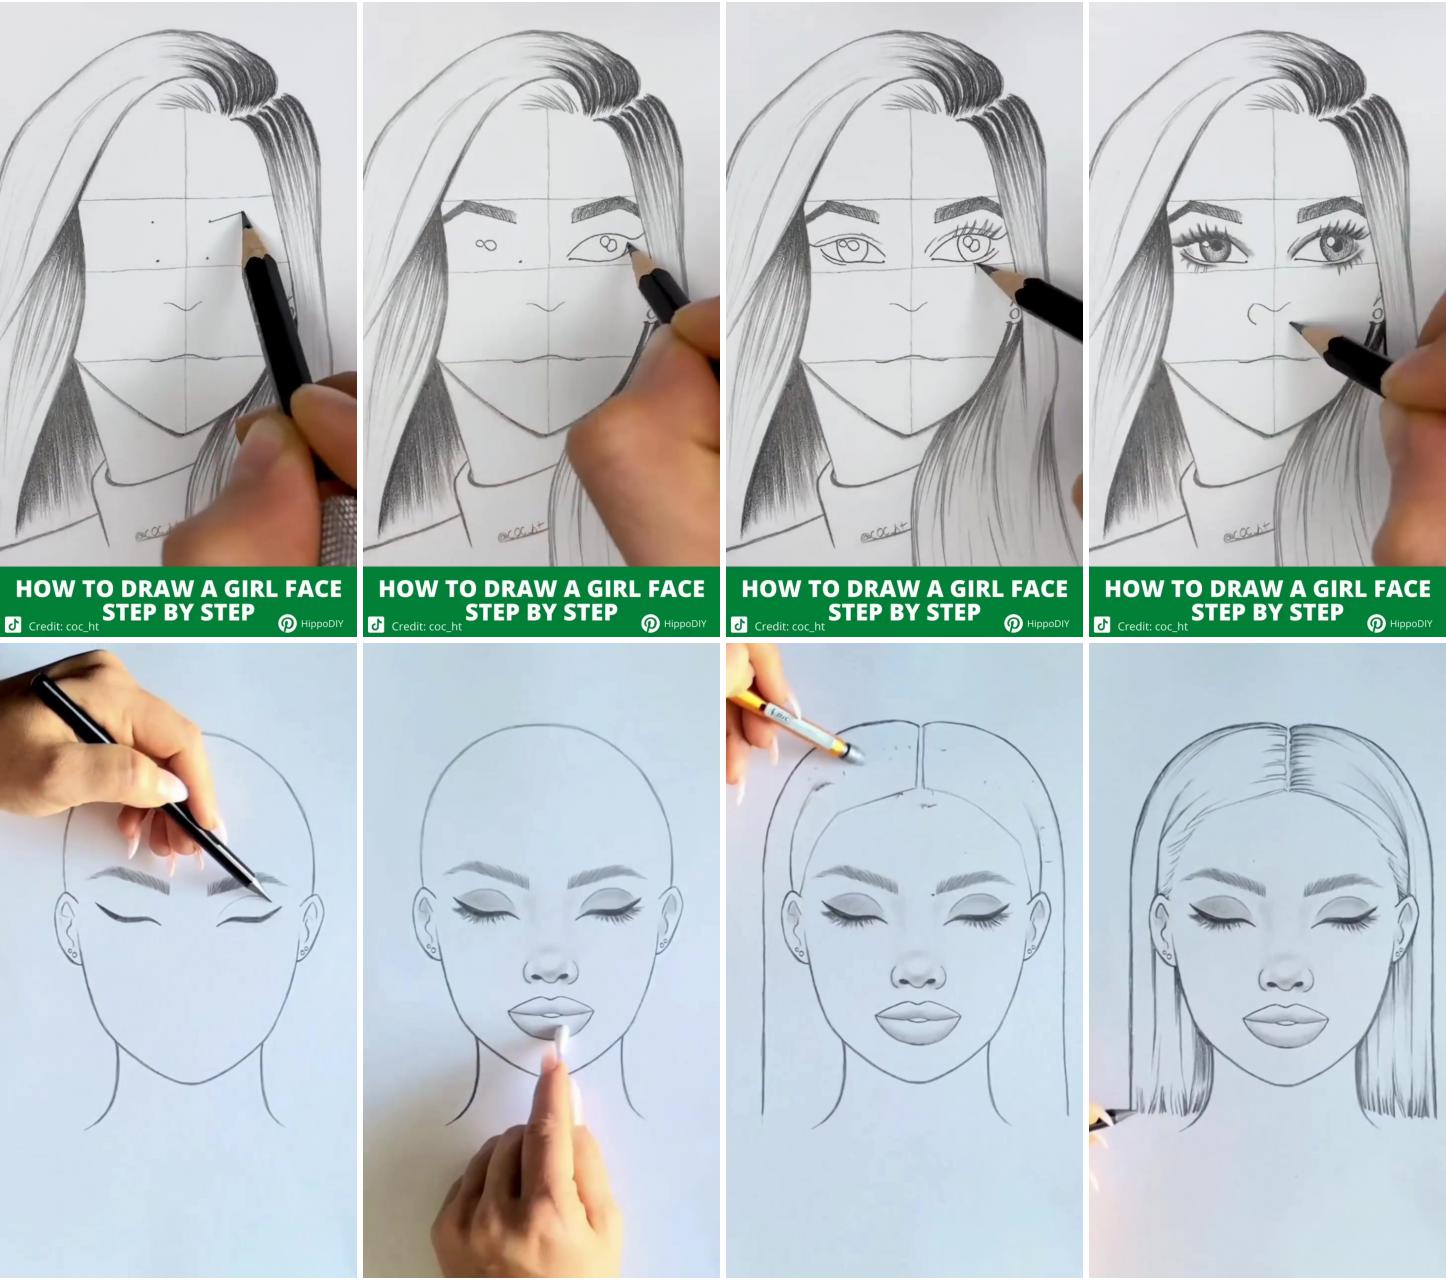 Draw a girl face step by step | painting art lesson